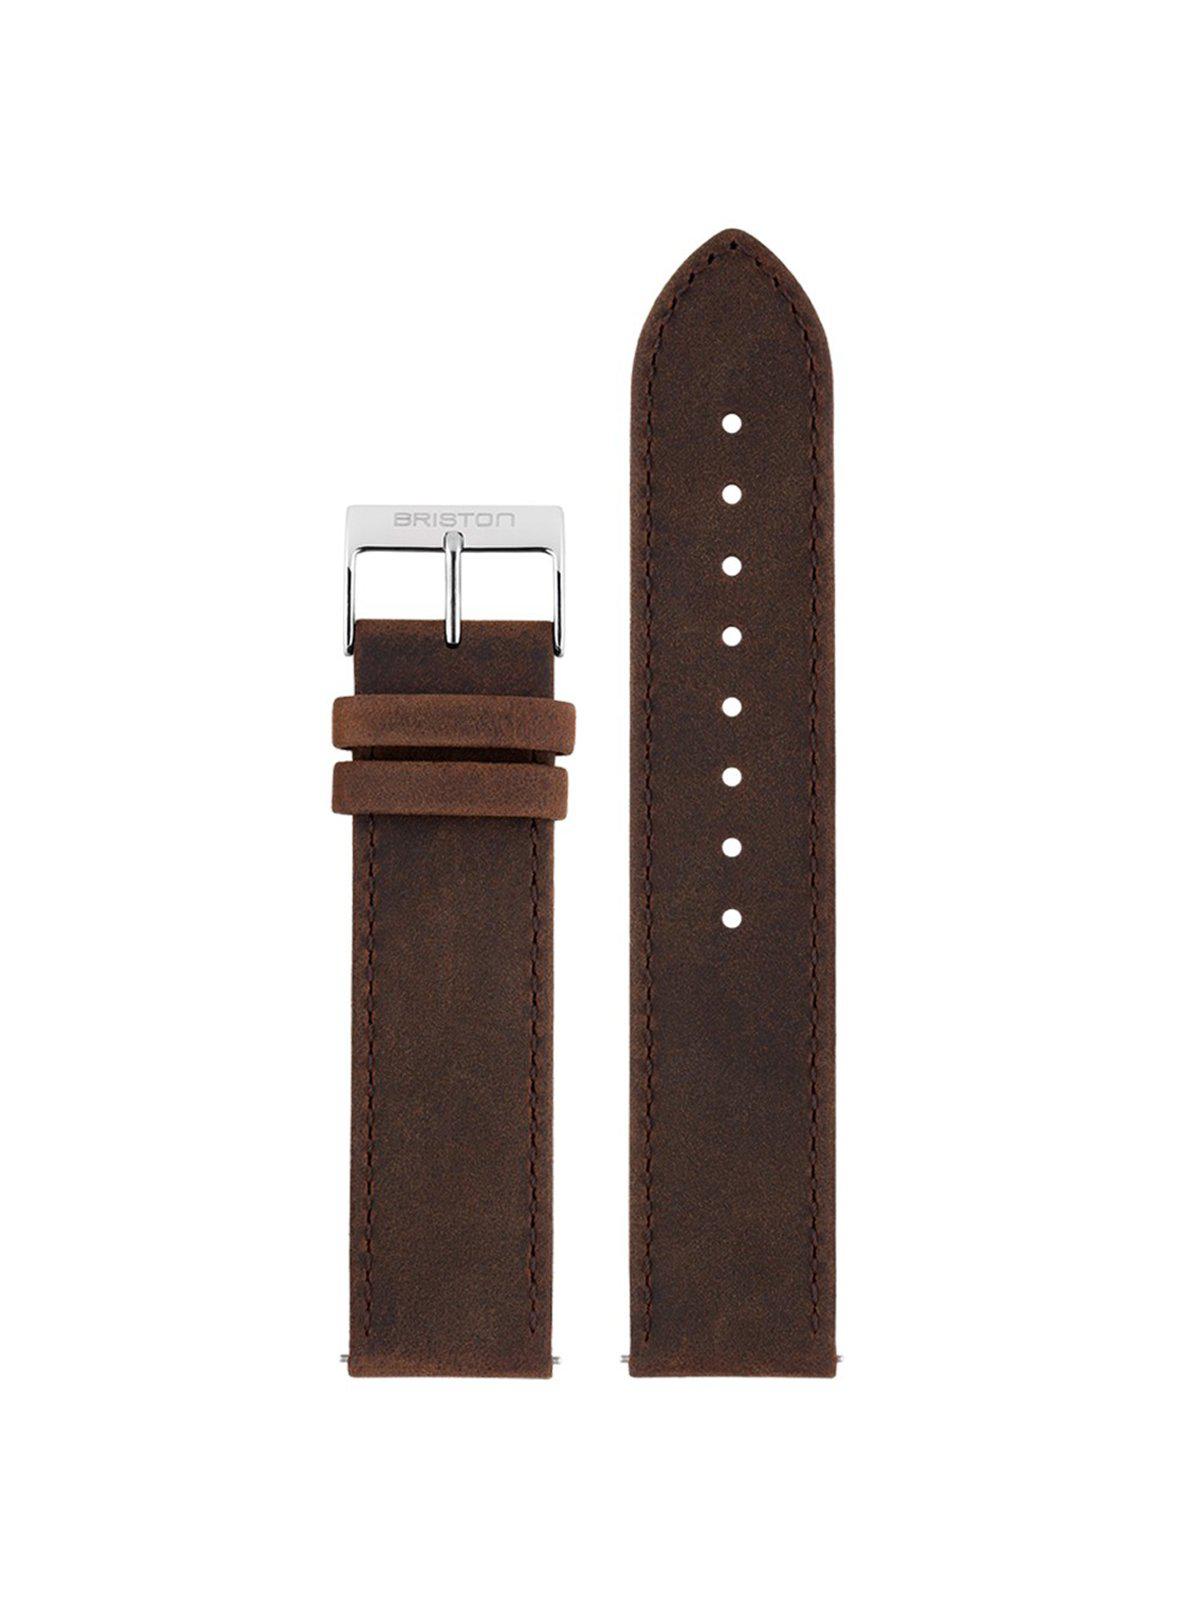 Briston 2-Part Vintage Leather Strap Chocolate Polished Steel 20mm - MORE by Morello Indonesia